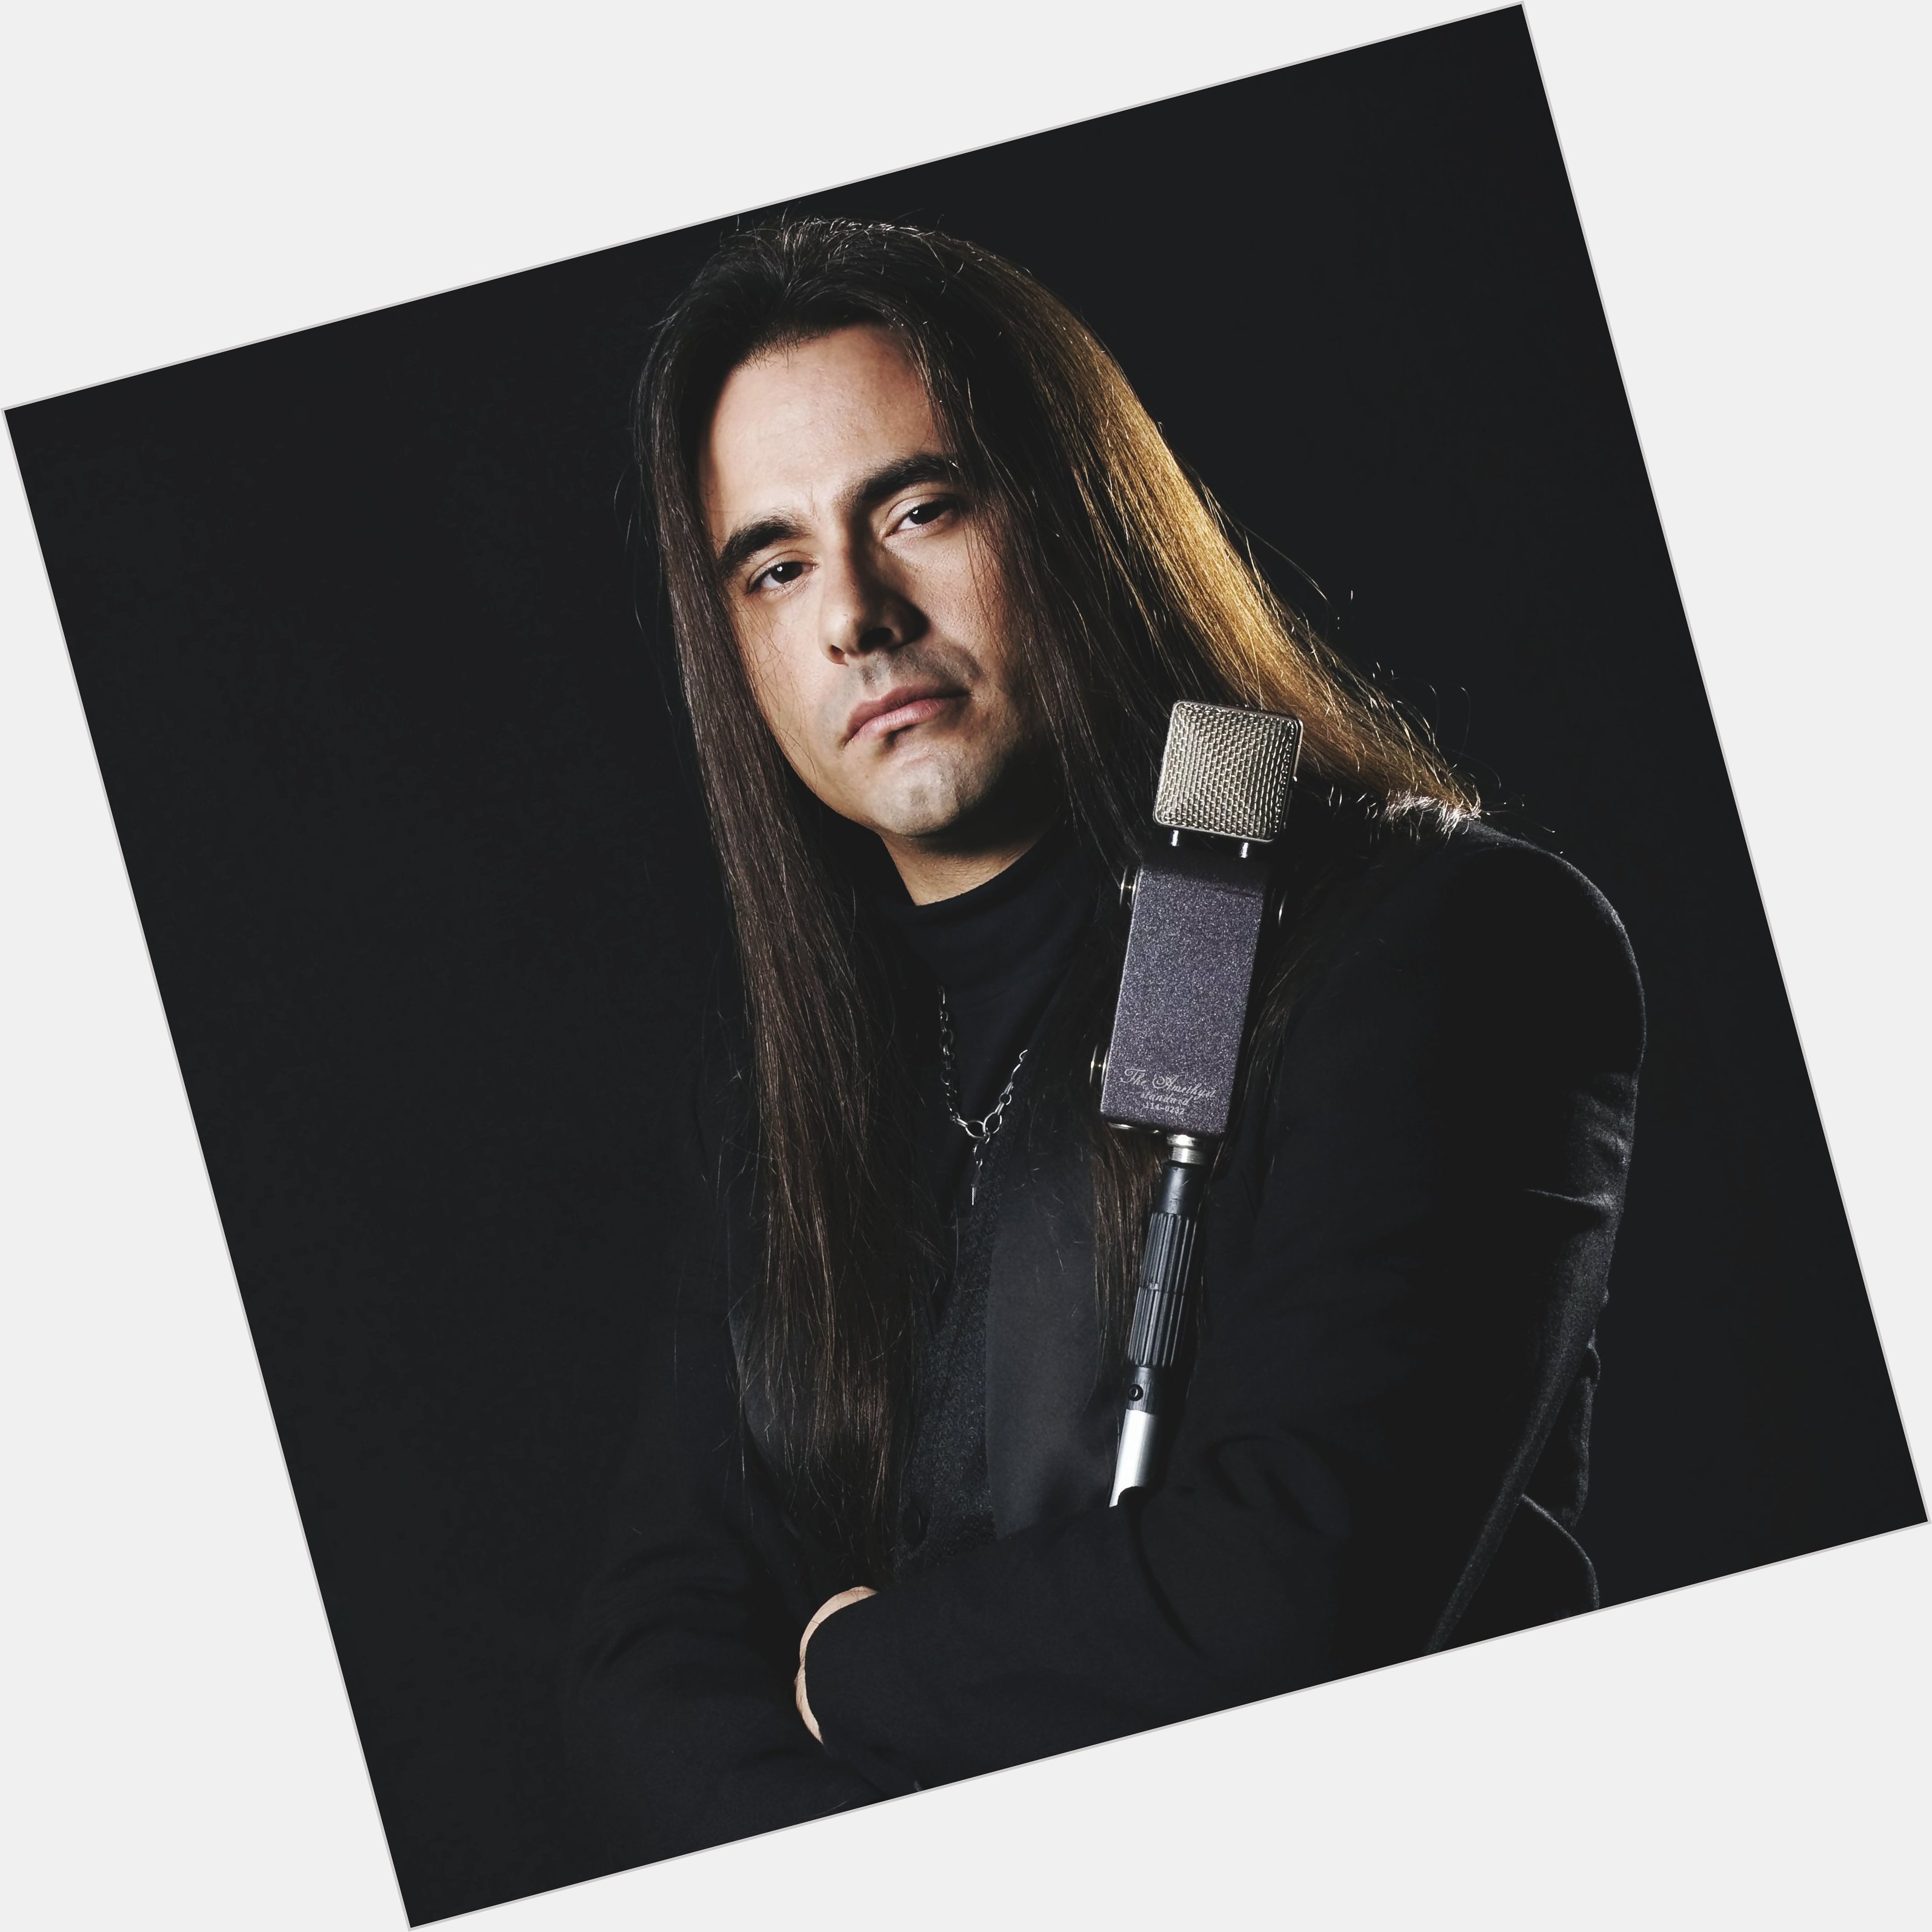 Https://fanpagepress.net/m/A/Andre Matos Picture 1